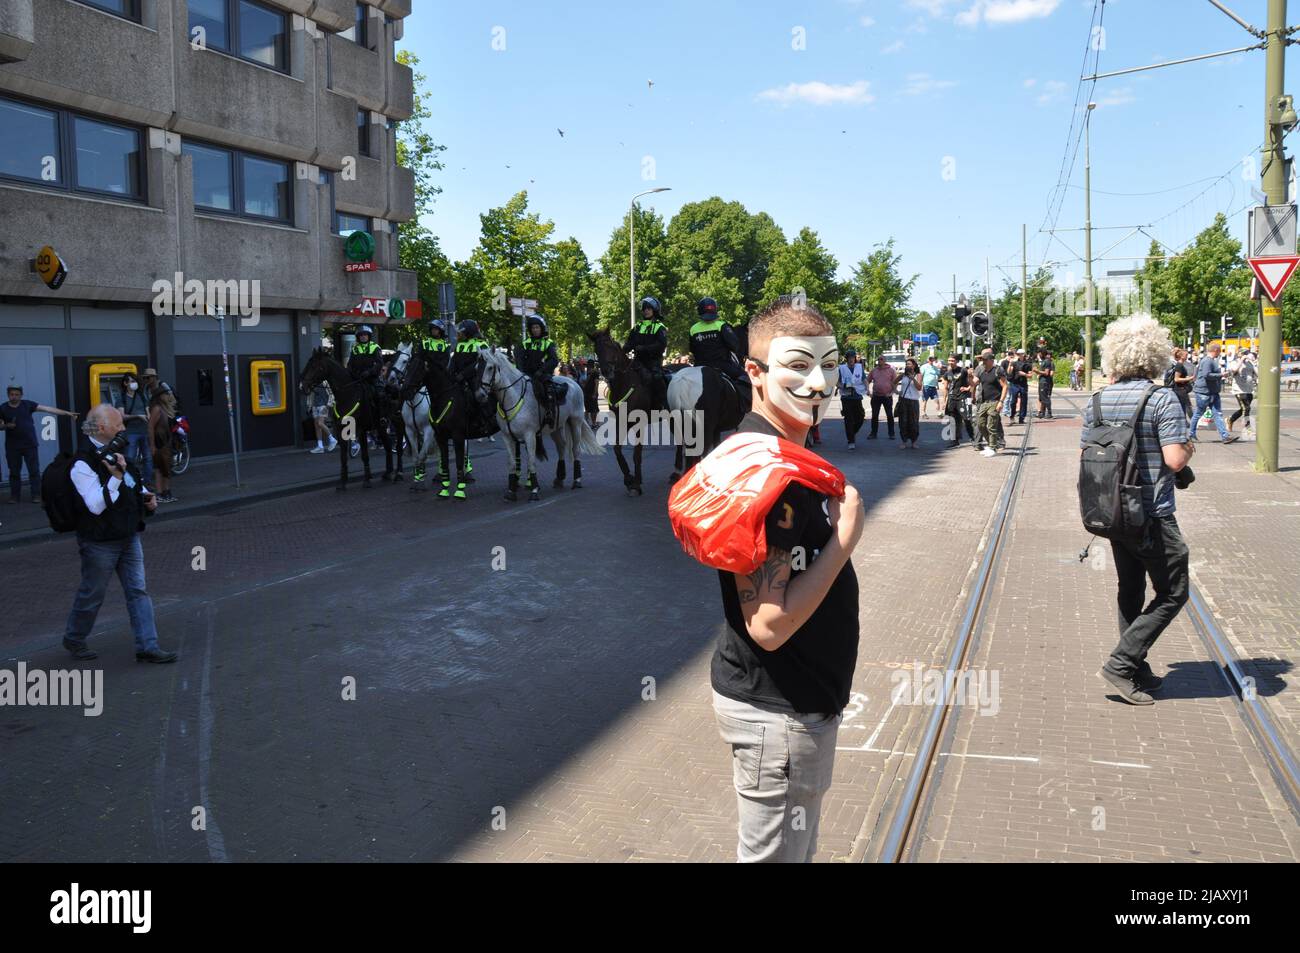 05-30-2020.Koekamp,The Hague,Netherlands.Anti lockdown protest.Because of corona measures only 30 people were allowed to protest.More people showed up,so the police broke down the demonstration.There was no violence but 37 people were arrested for not leaving the area. Stock Photo